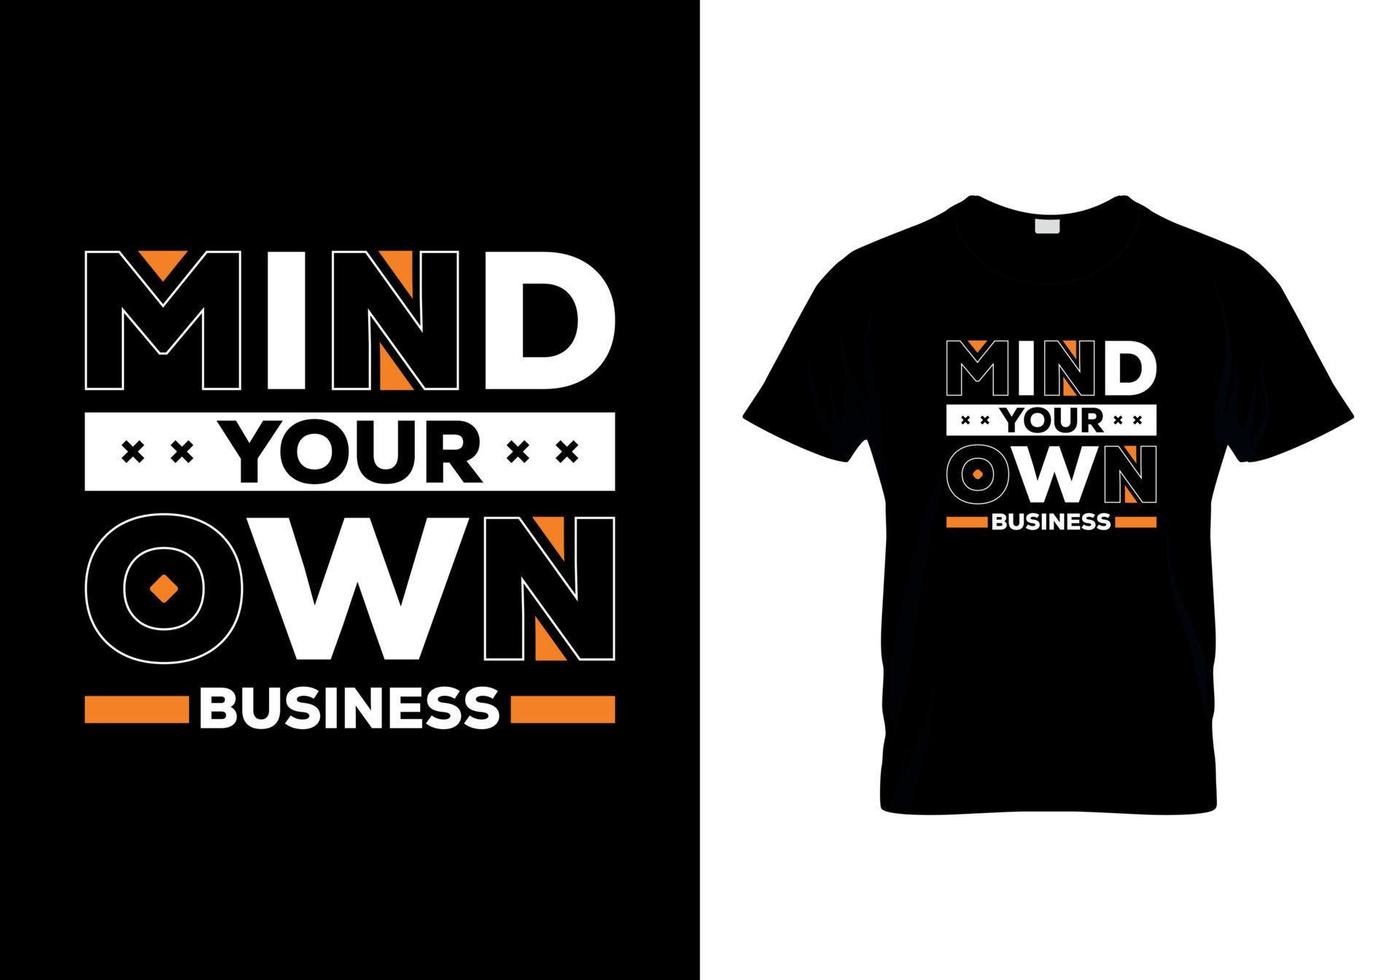 Mind Your Own Business t-shirts design vector